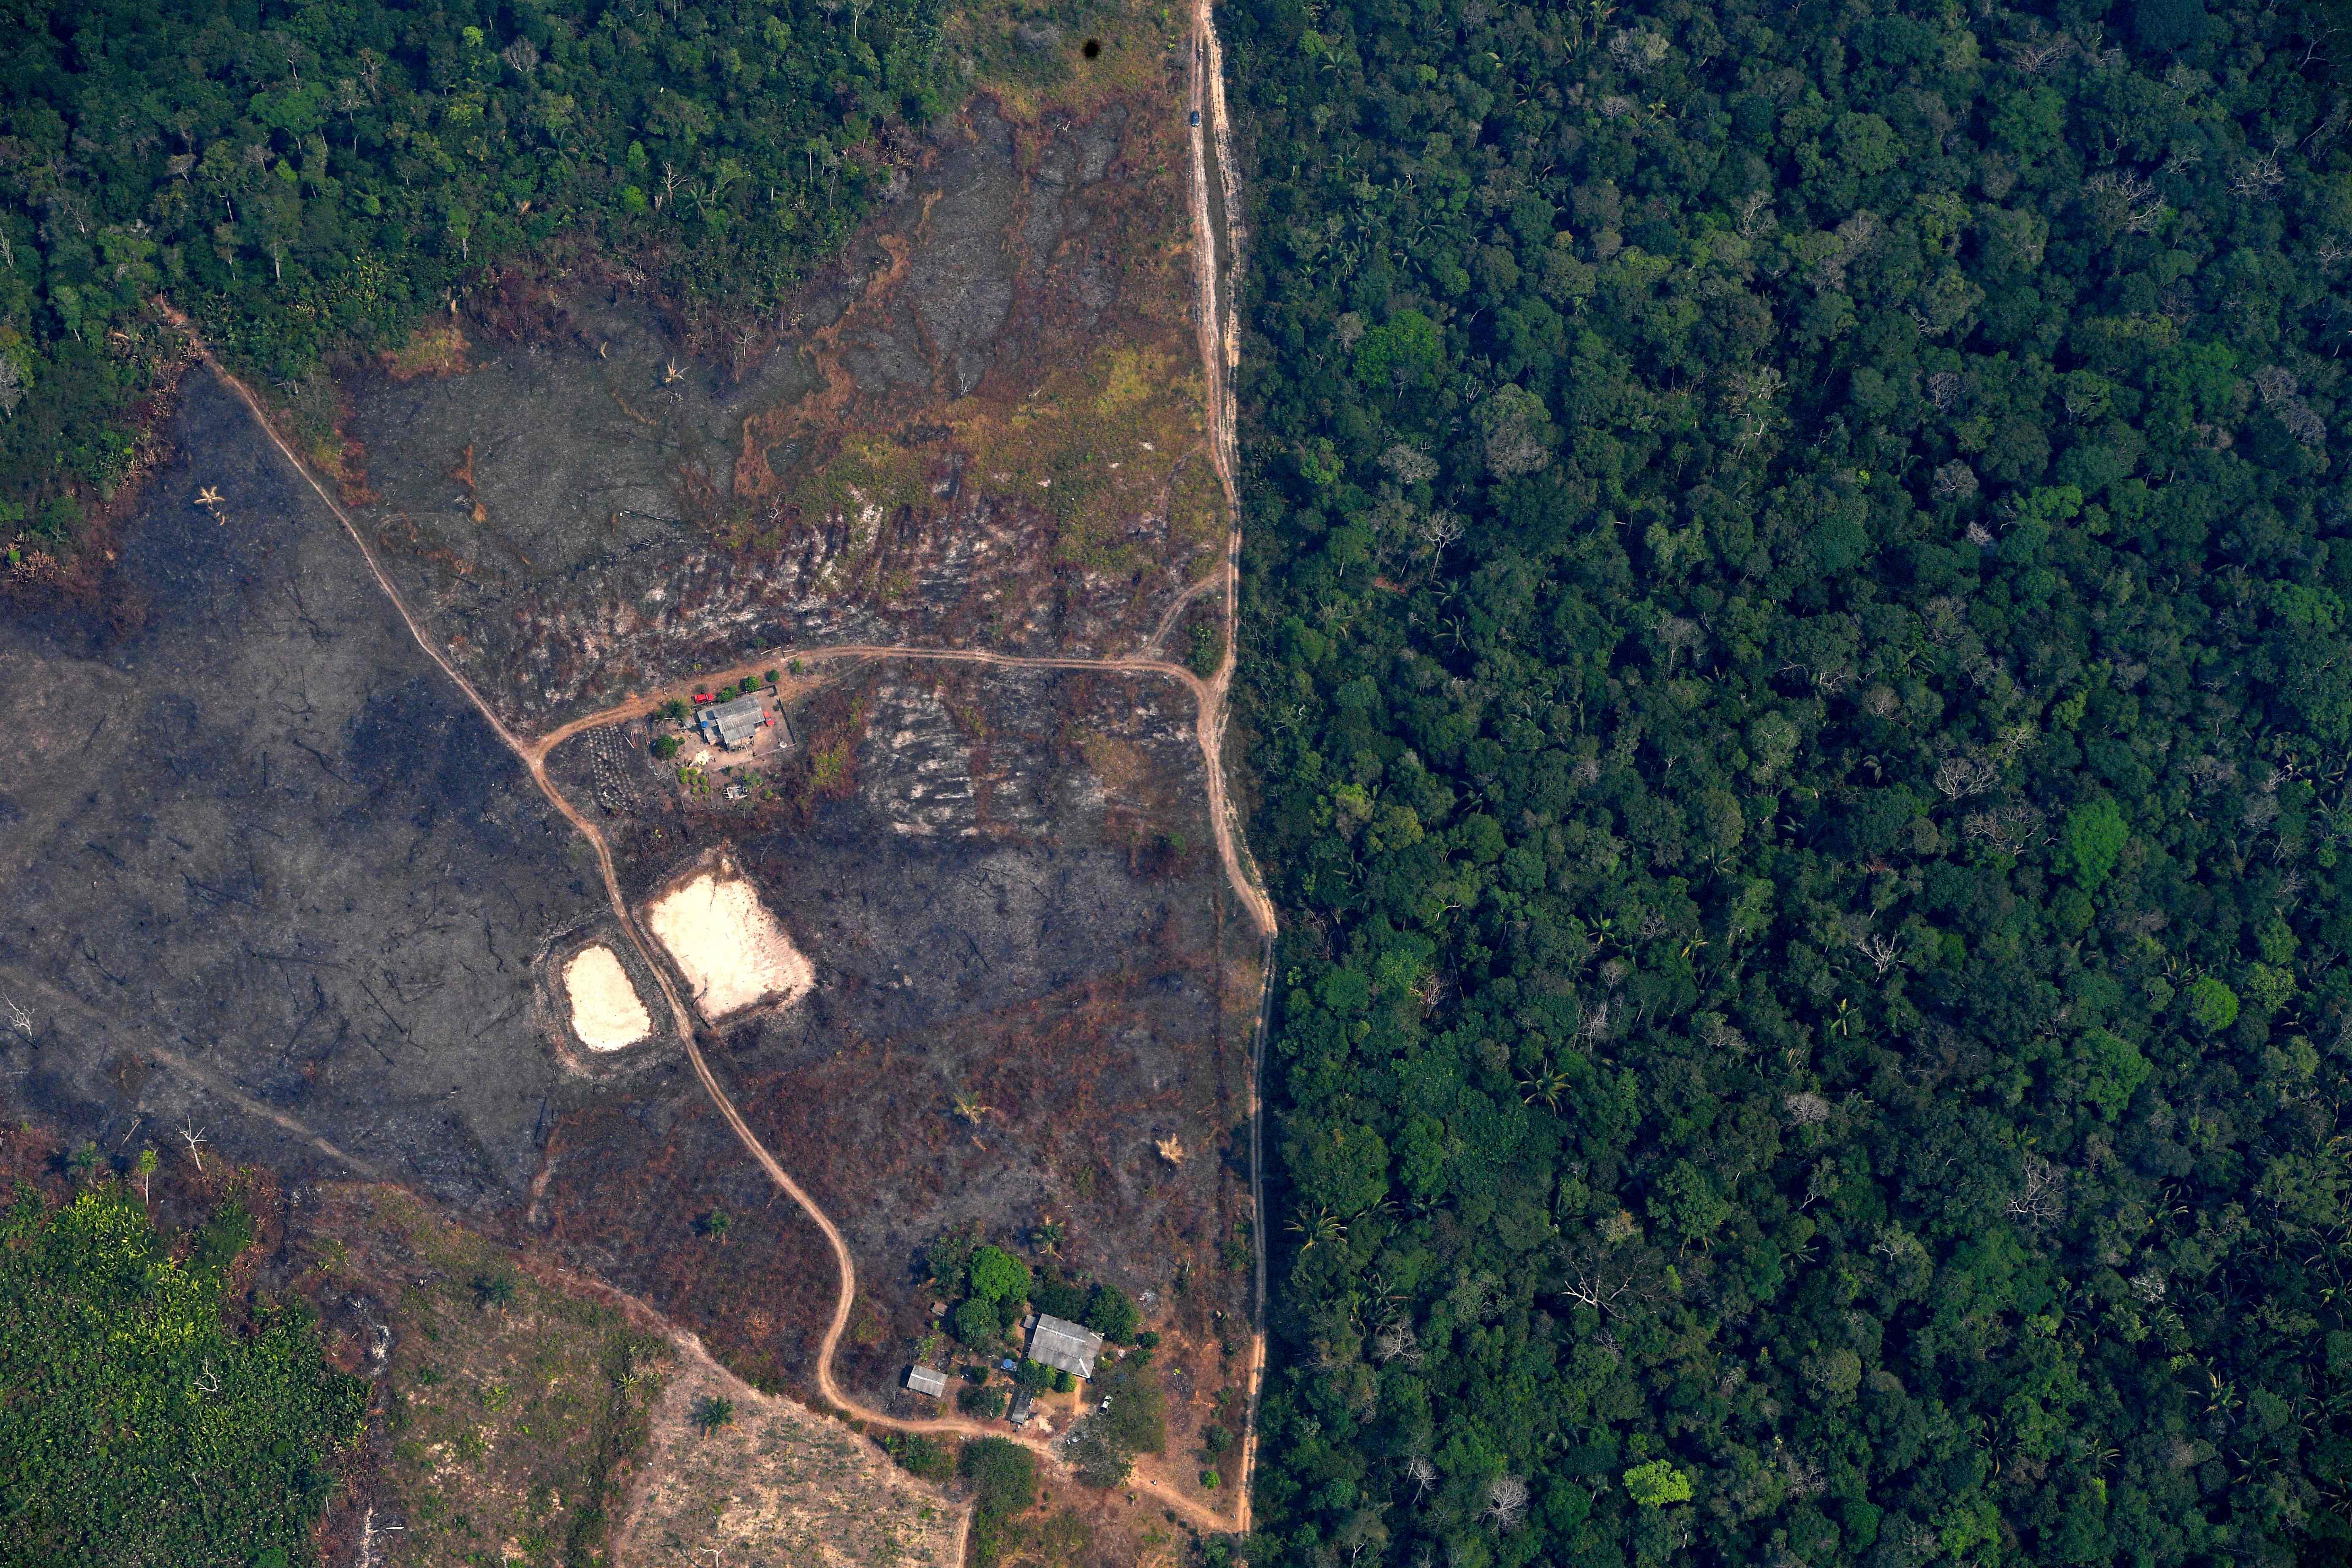 File photo taken on August 23, 2019 of an aerial view of a deforested piece of land in the Amazon rainforest near an area affected by fires, about 65 km from Porto Velho, in the state of Rondonia, in northern Brazil. (AFP photo)